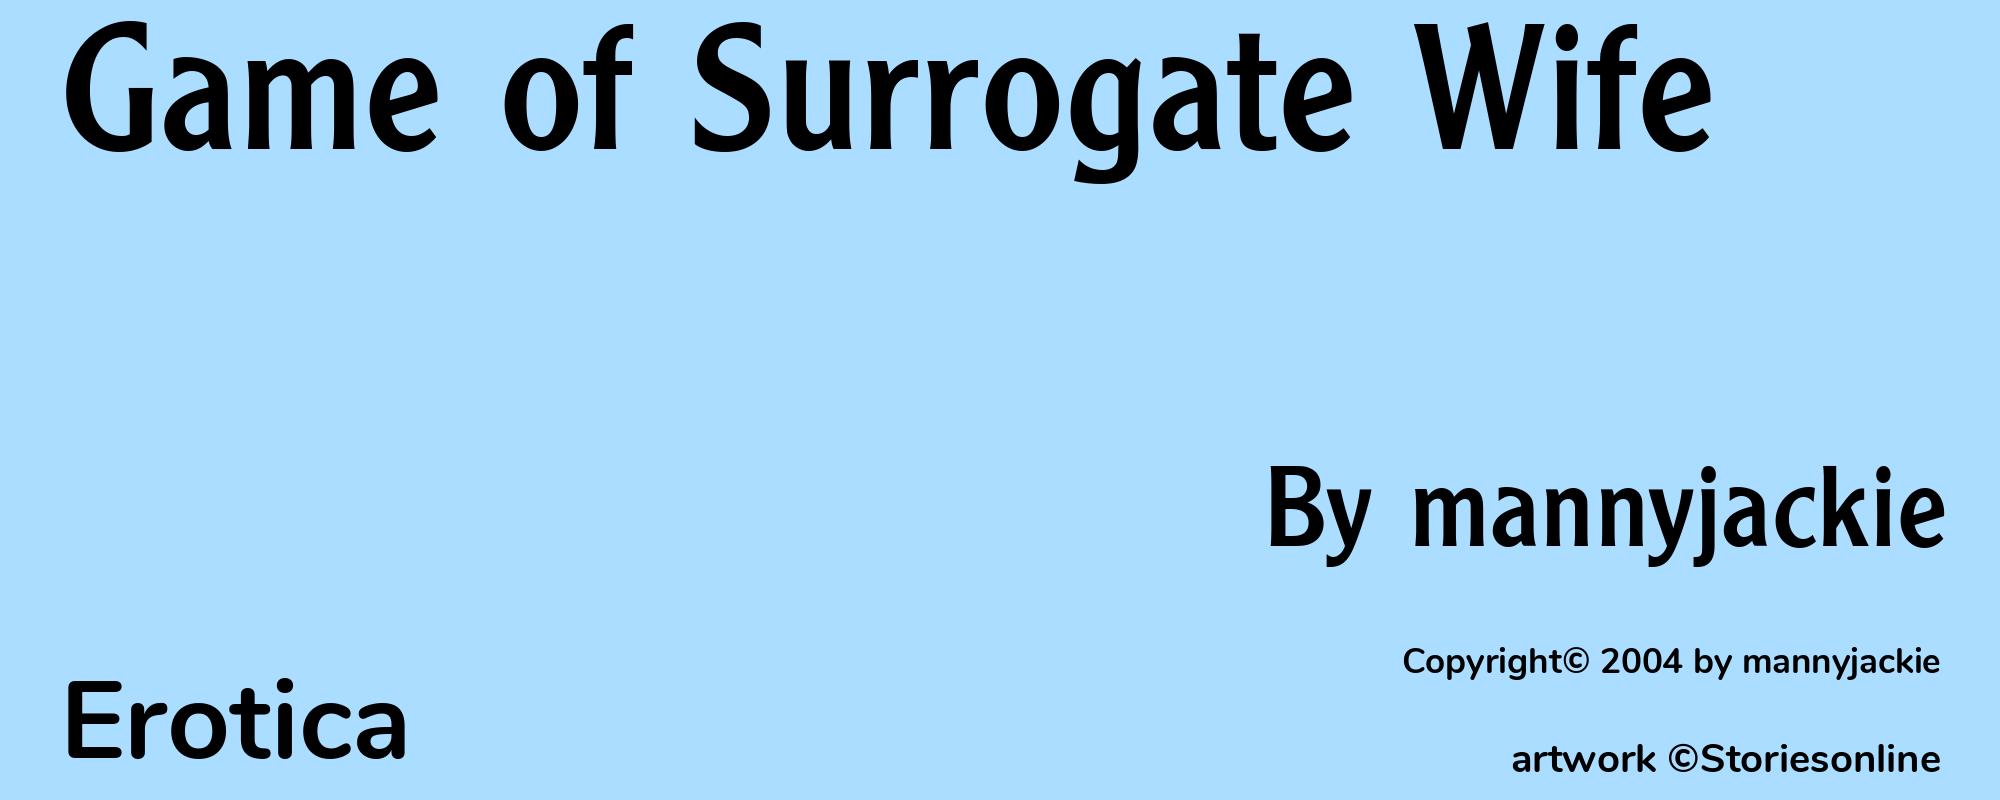 Game of Surrogate Wife - Cover